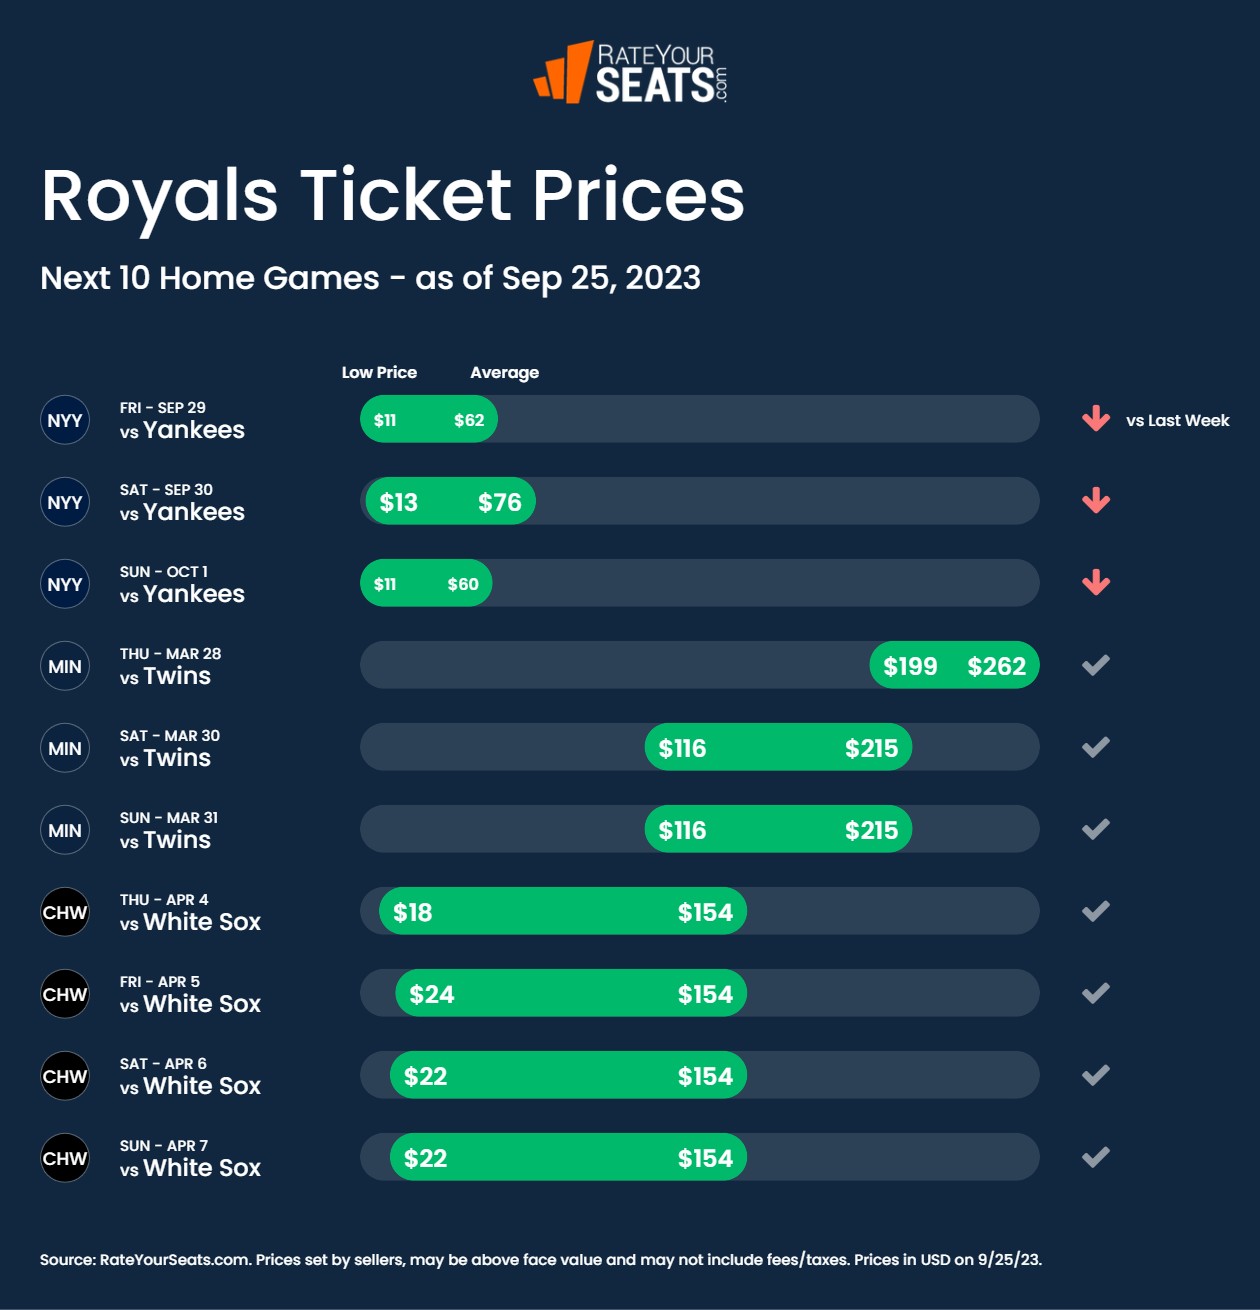 Royals tickets pricing week of September 25 2023